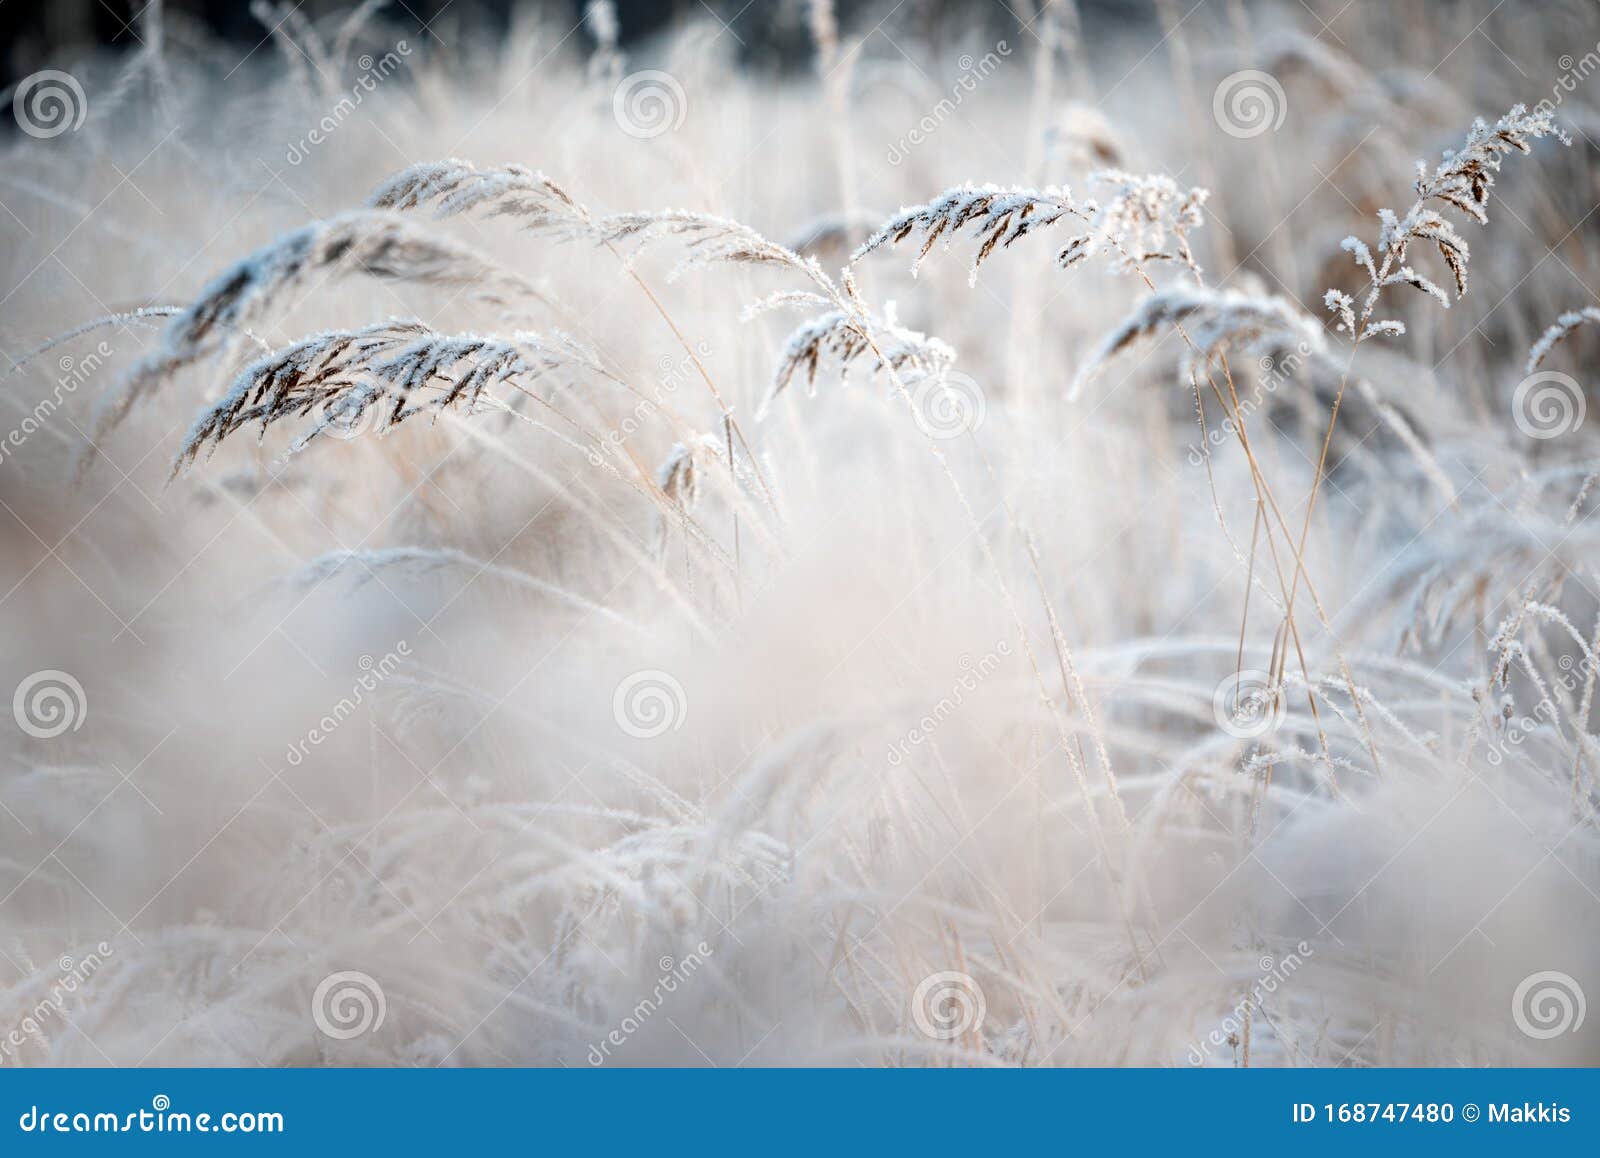 Frost Covered Grasses in Winter Landscape Stock Photo - Image of nature ...